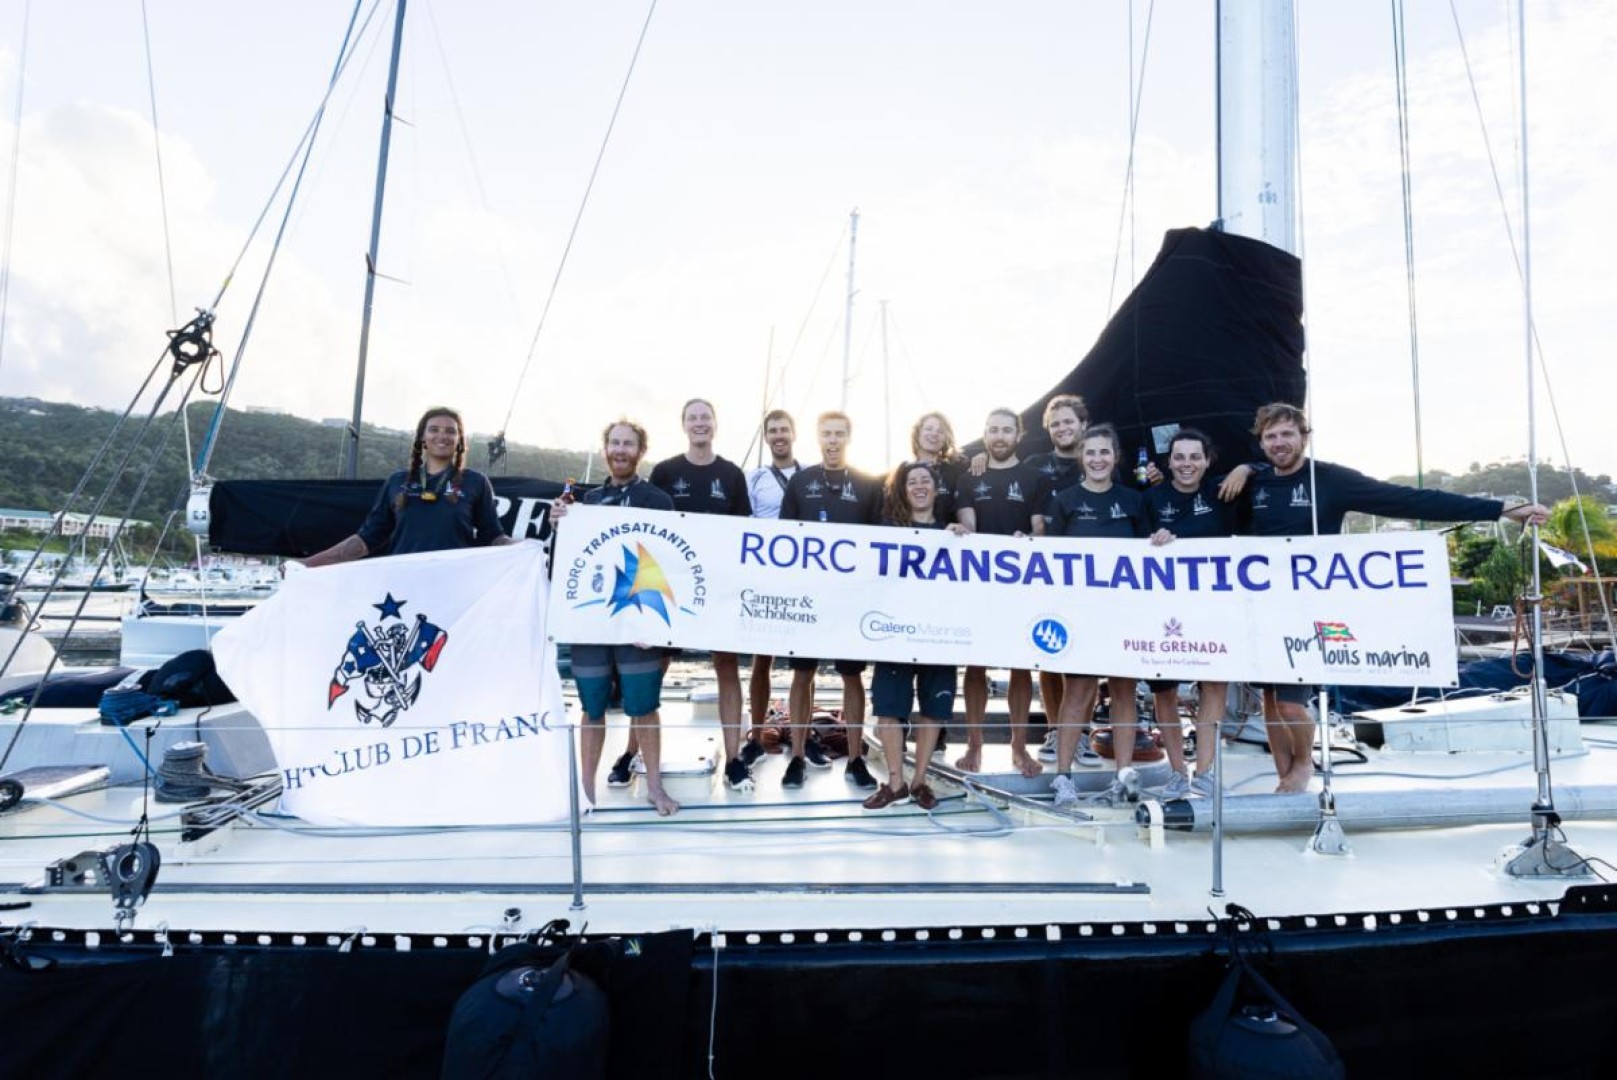 Celebrating after the finish in Grenada. Proudly displaying the flag of the Yacht Club de France